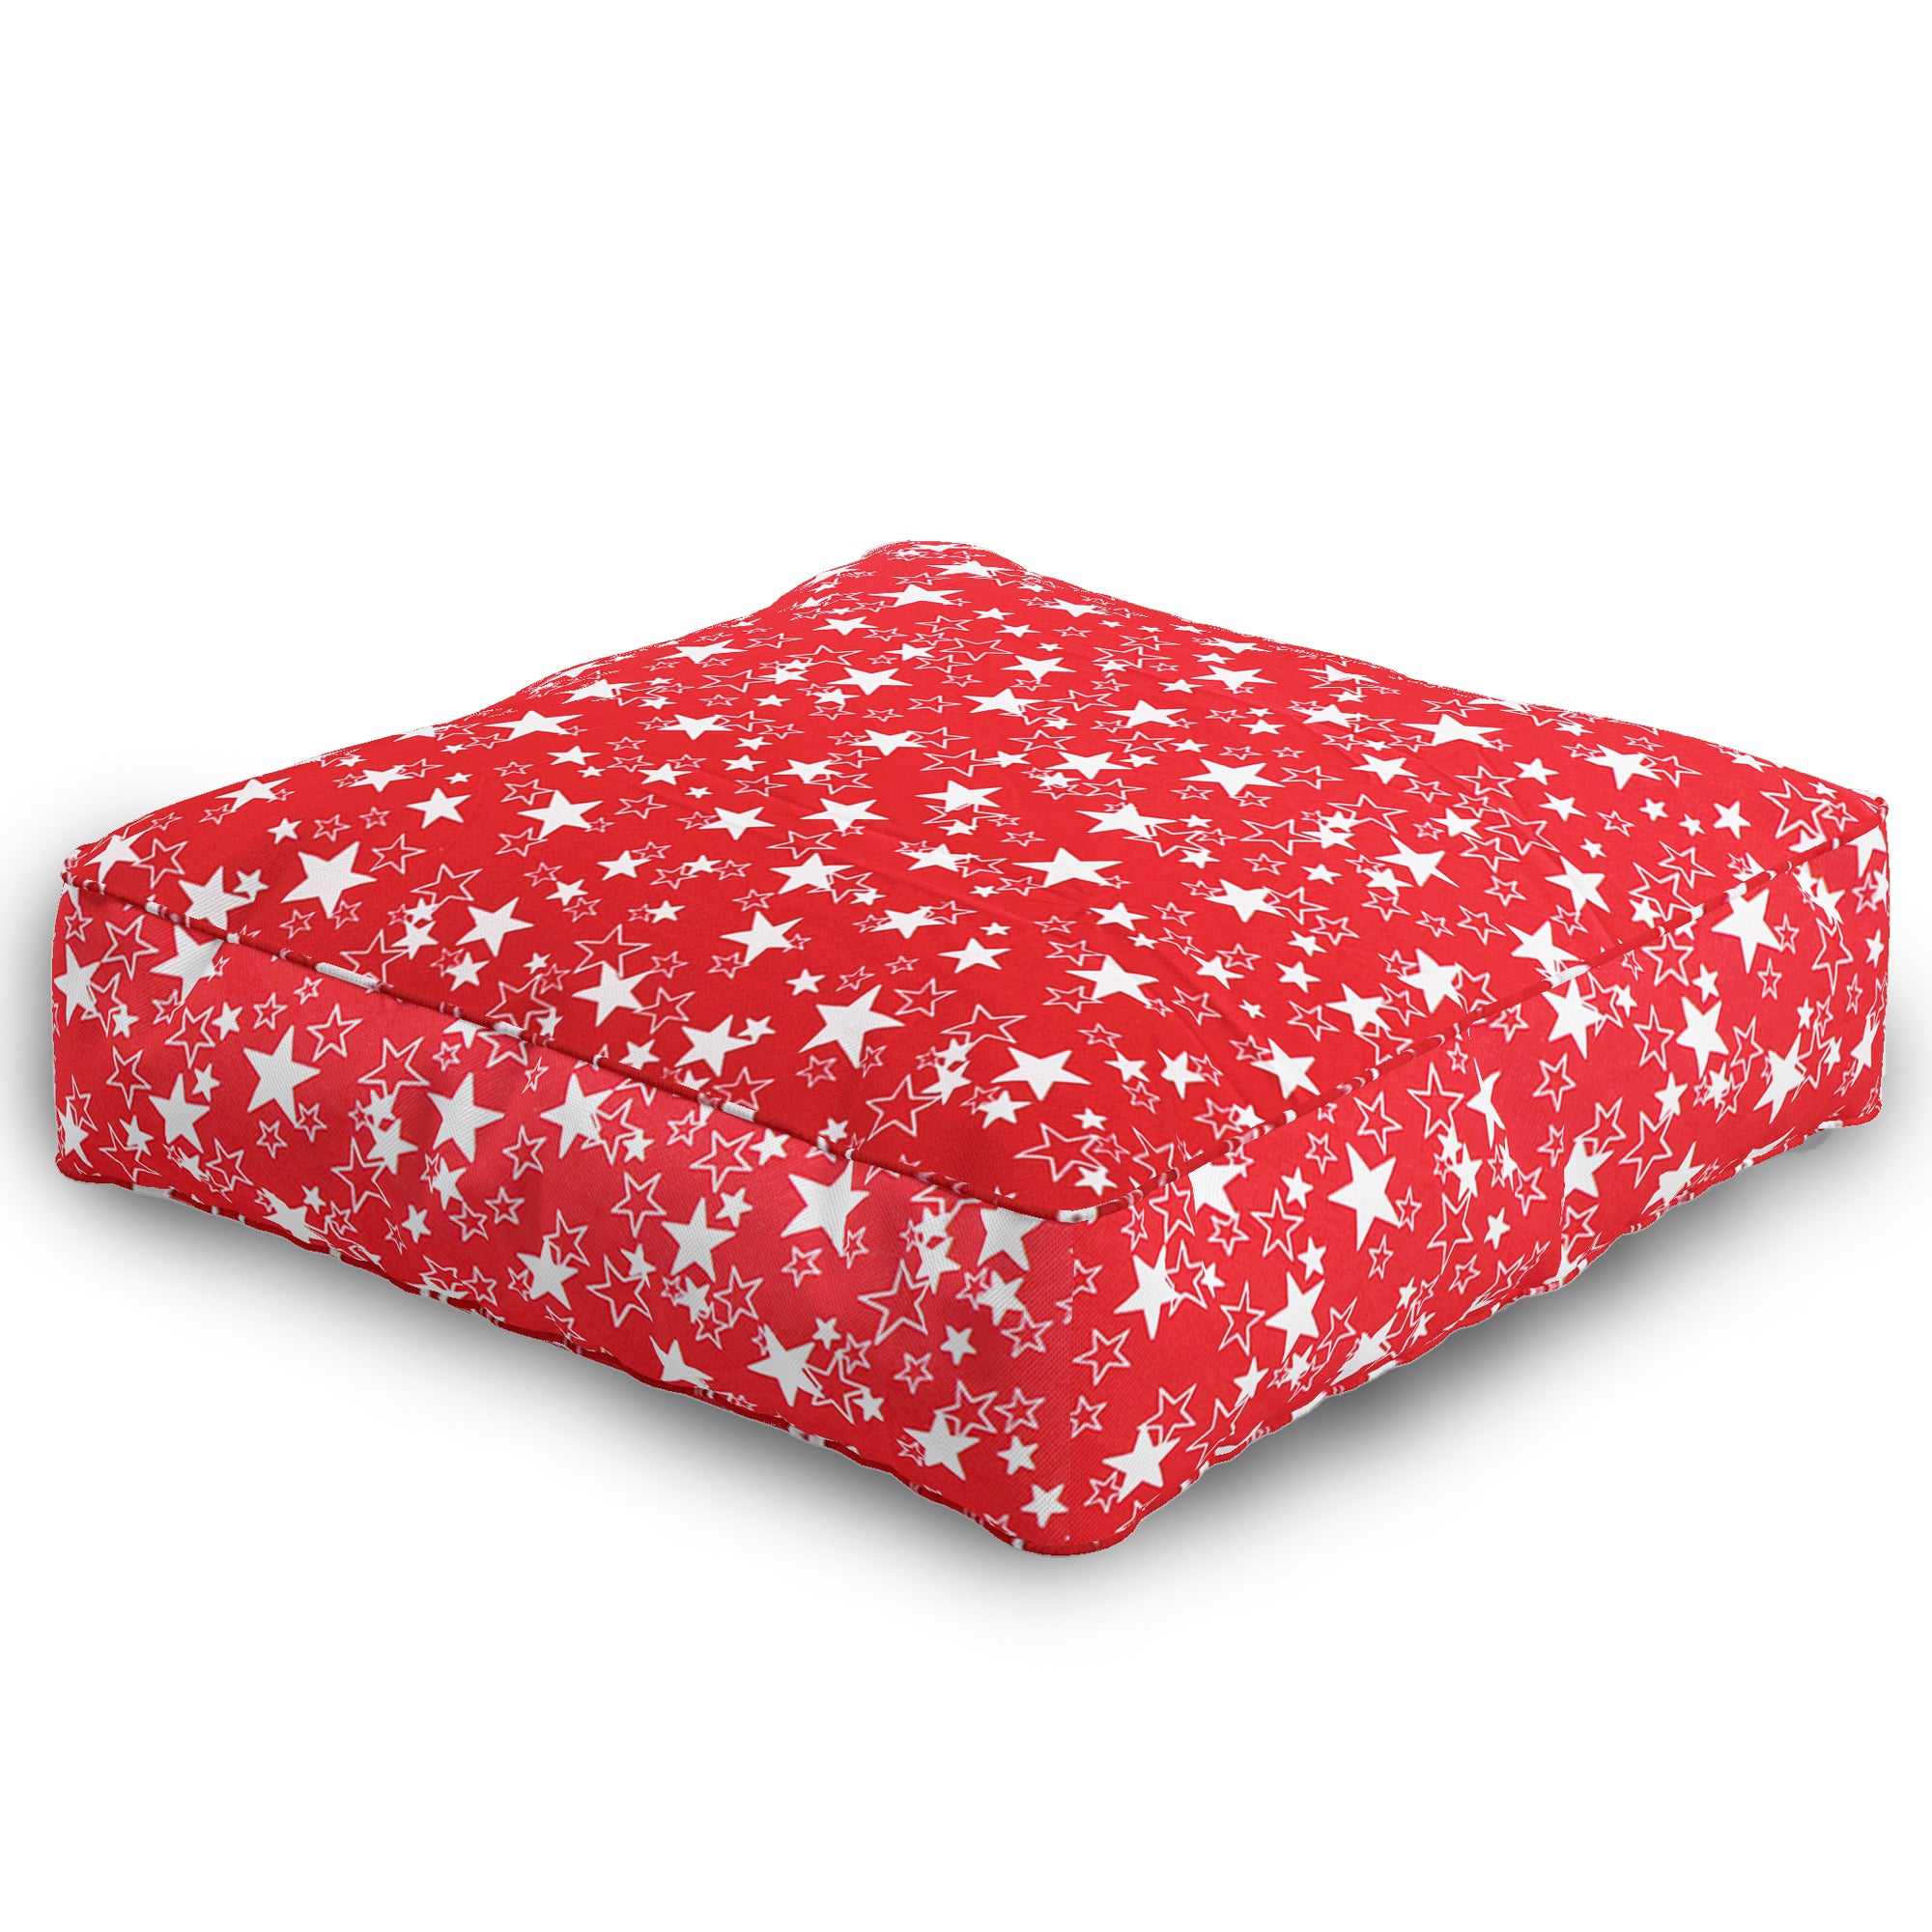 Coozly Zippered Foam Floor Cushions | Seat Cushions | Sofa Cushions with Removable Covers -Red Star